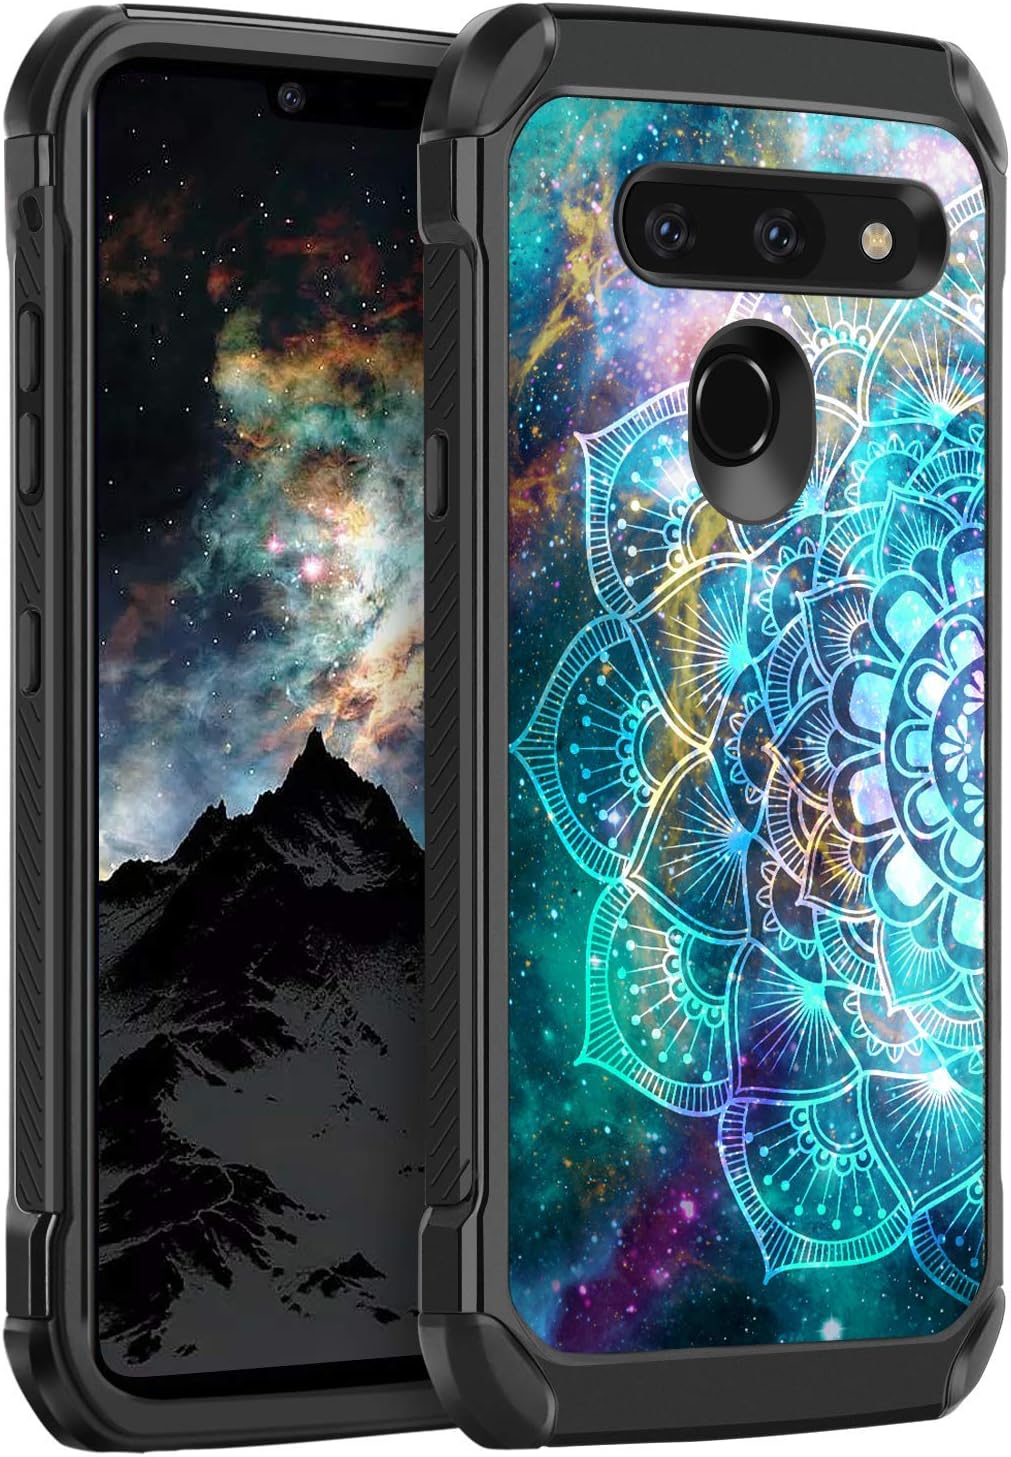 BENTOBEN Compatible with LG G8 ThinQ/LG G8 Case, Shockproof Glow in The Dark Luminous 2 in 1 Hard PC Soft TPU Bumper Protective Phone Case Cover for LG G8 Thin Q/LG G8 2019 Release, Mandala in Galaxy